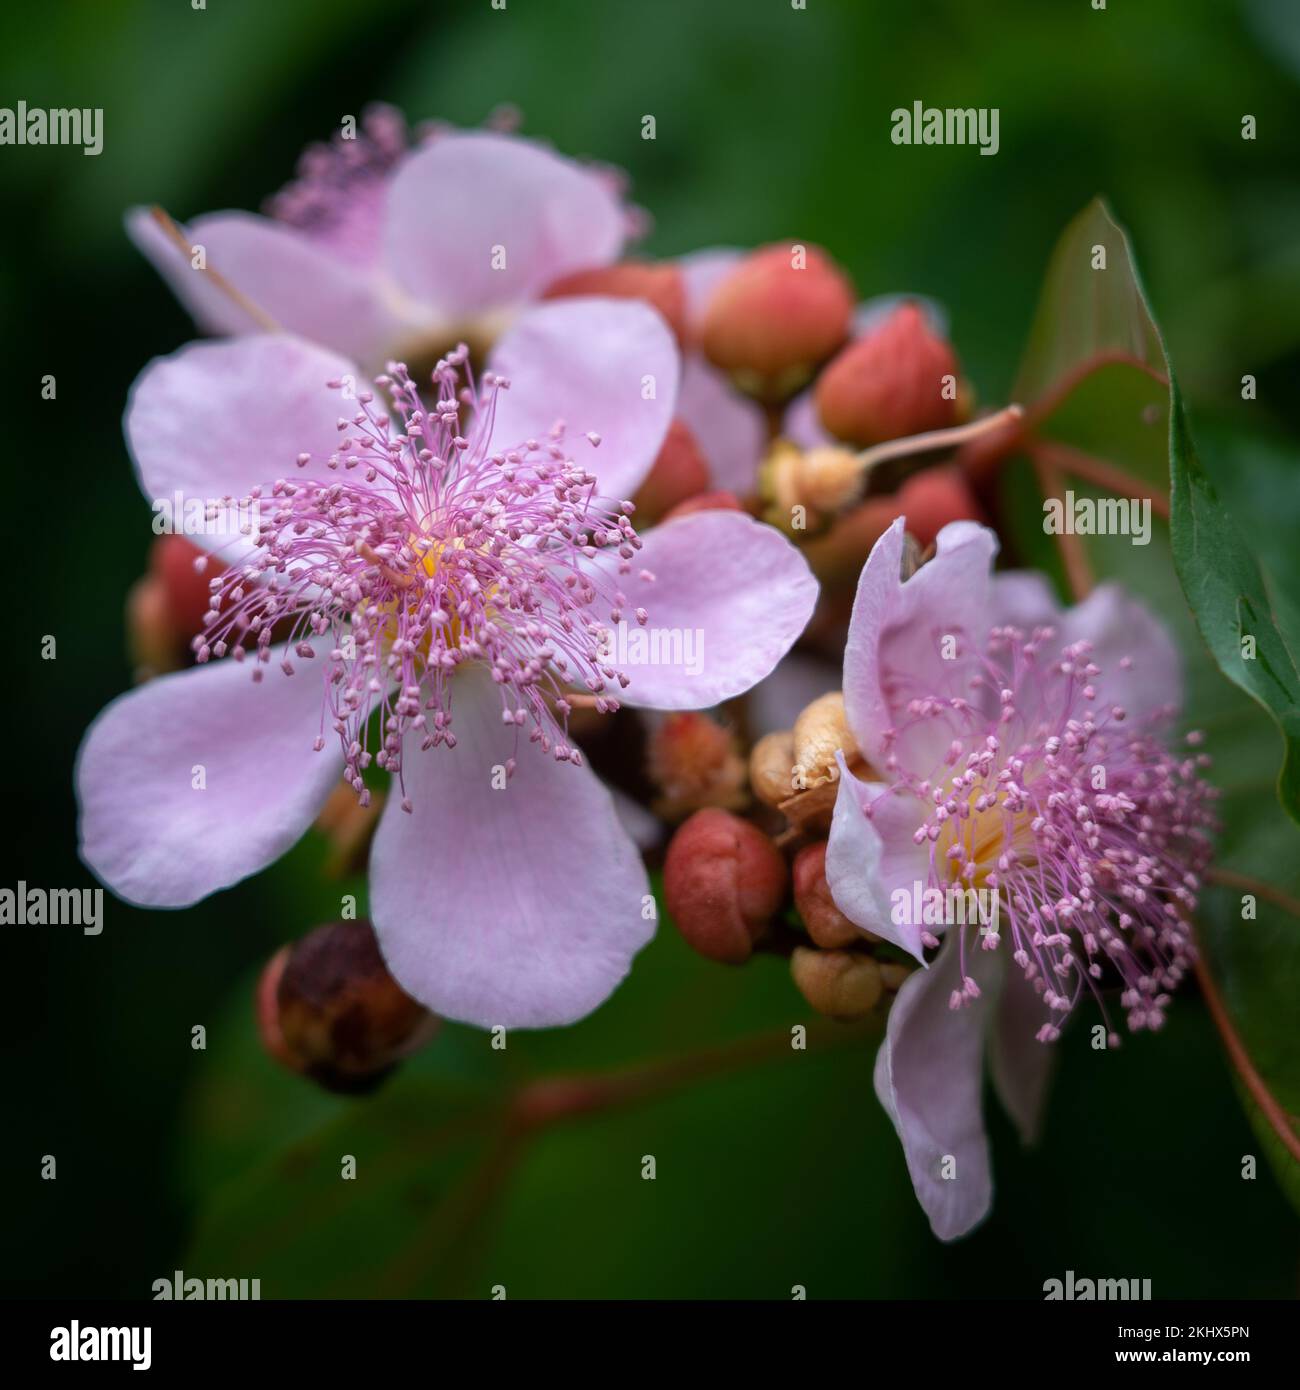 Closeup view of achiote or bixa orellana cluster of pink flowers and buds outdoors on green natural background Stock Photo